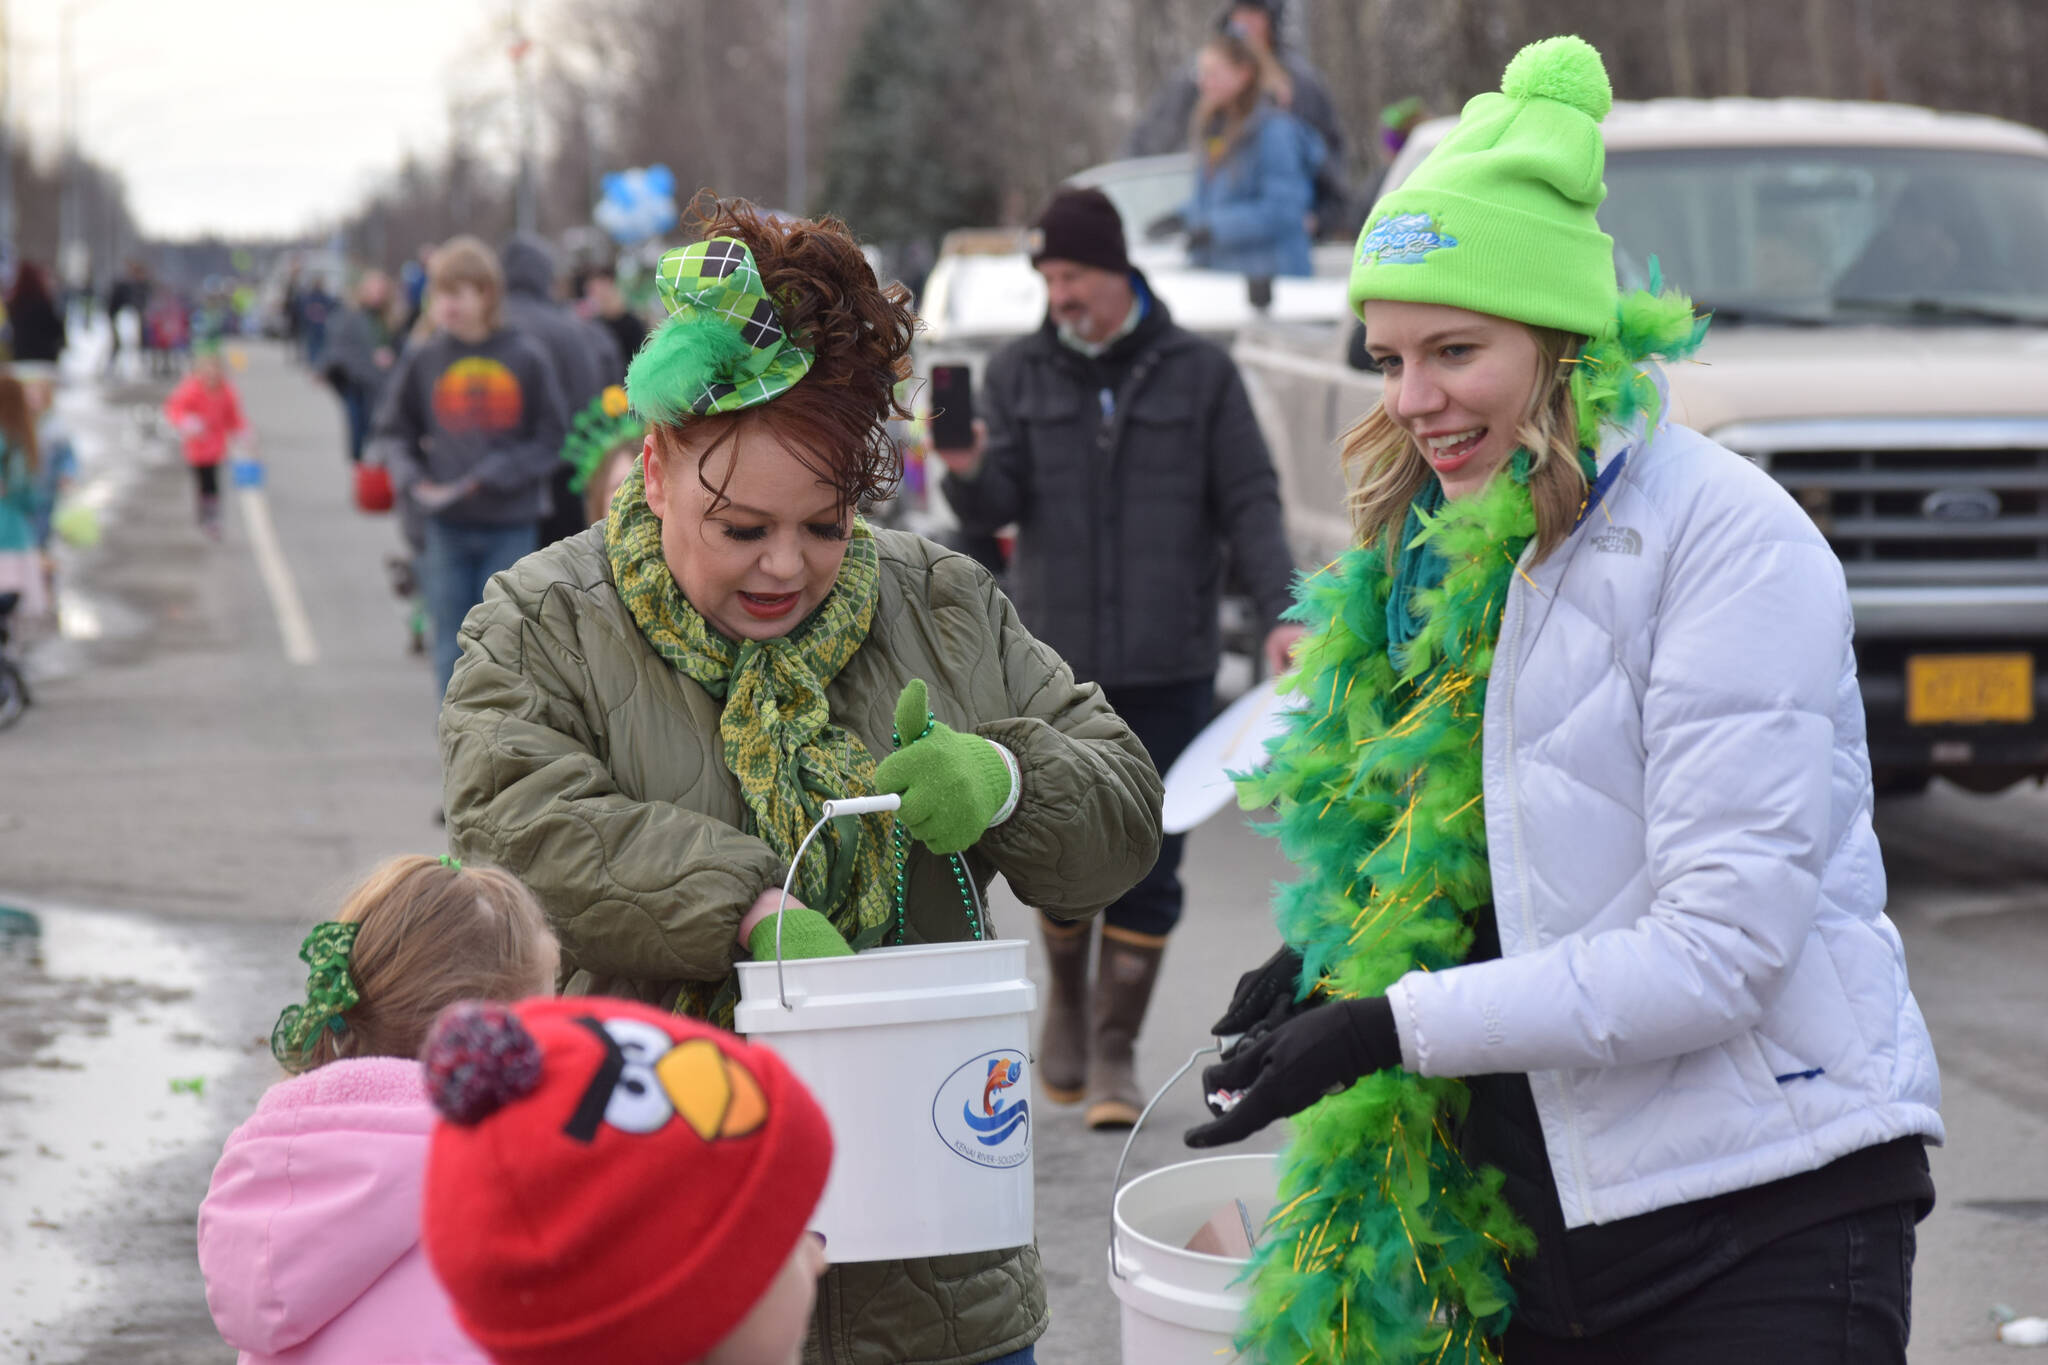 Shanon Davis and Monique Burgin of the Soldotna Chamber of Commerce hand out candy during the Sweeney’s St. Patrick’s Parade in Soldotna on March 17, 2022. (Camille Botello/Peninsula Clarion)